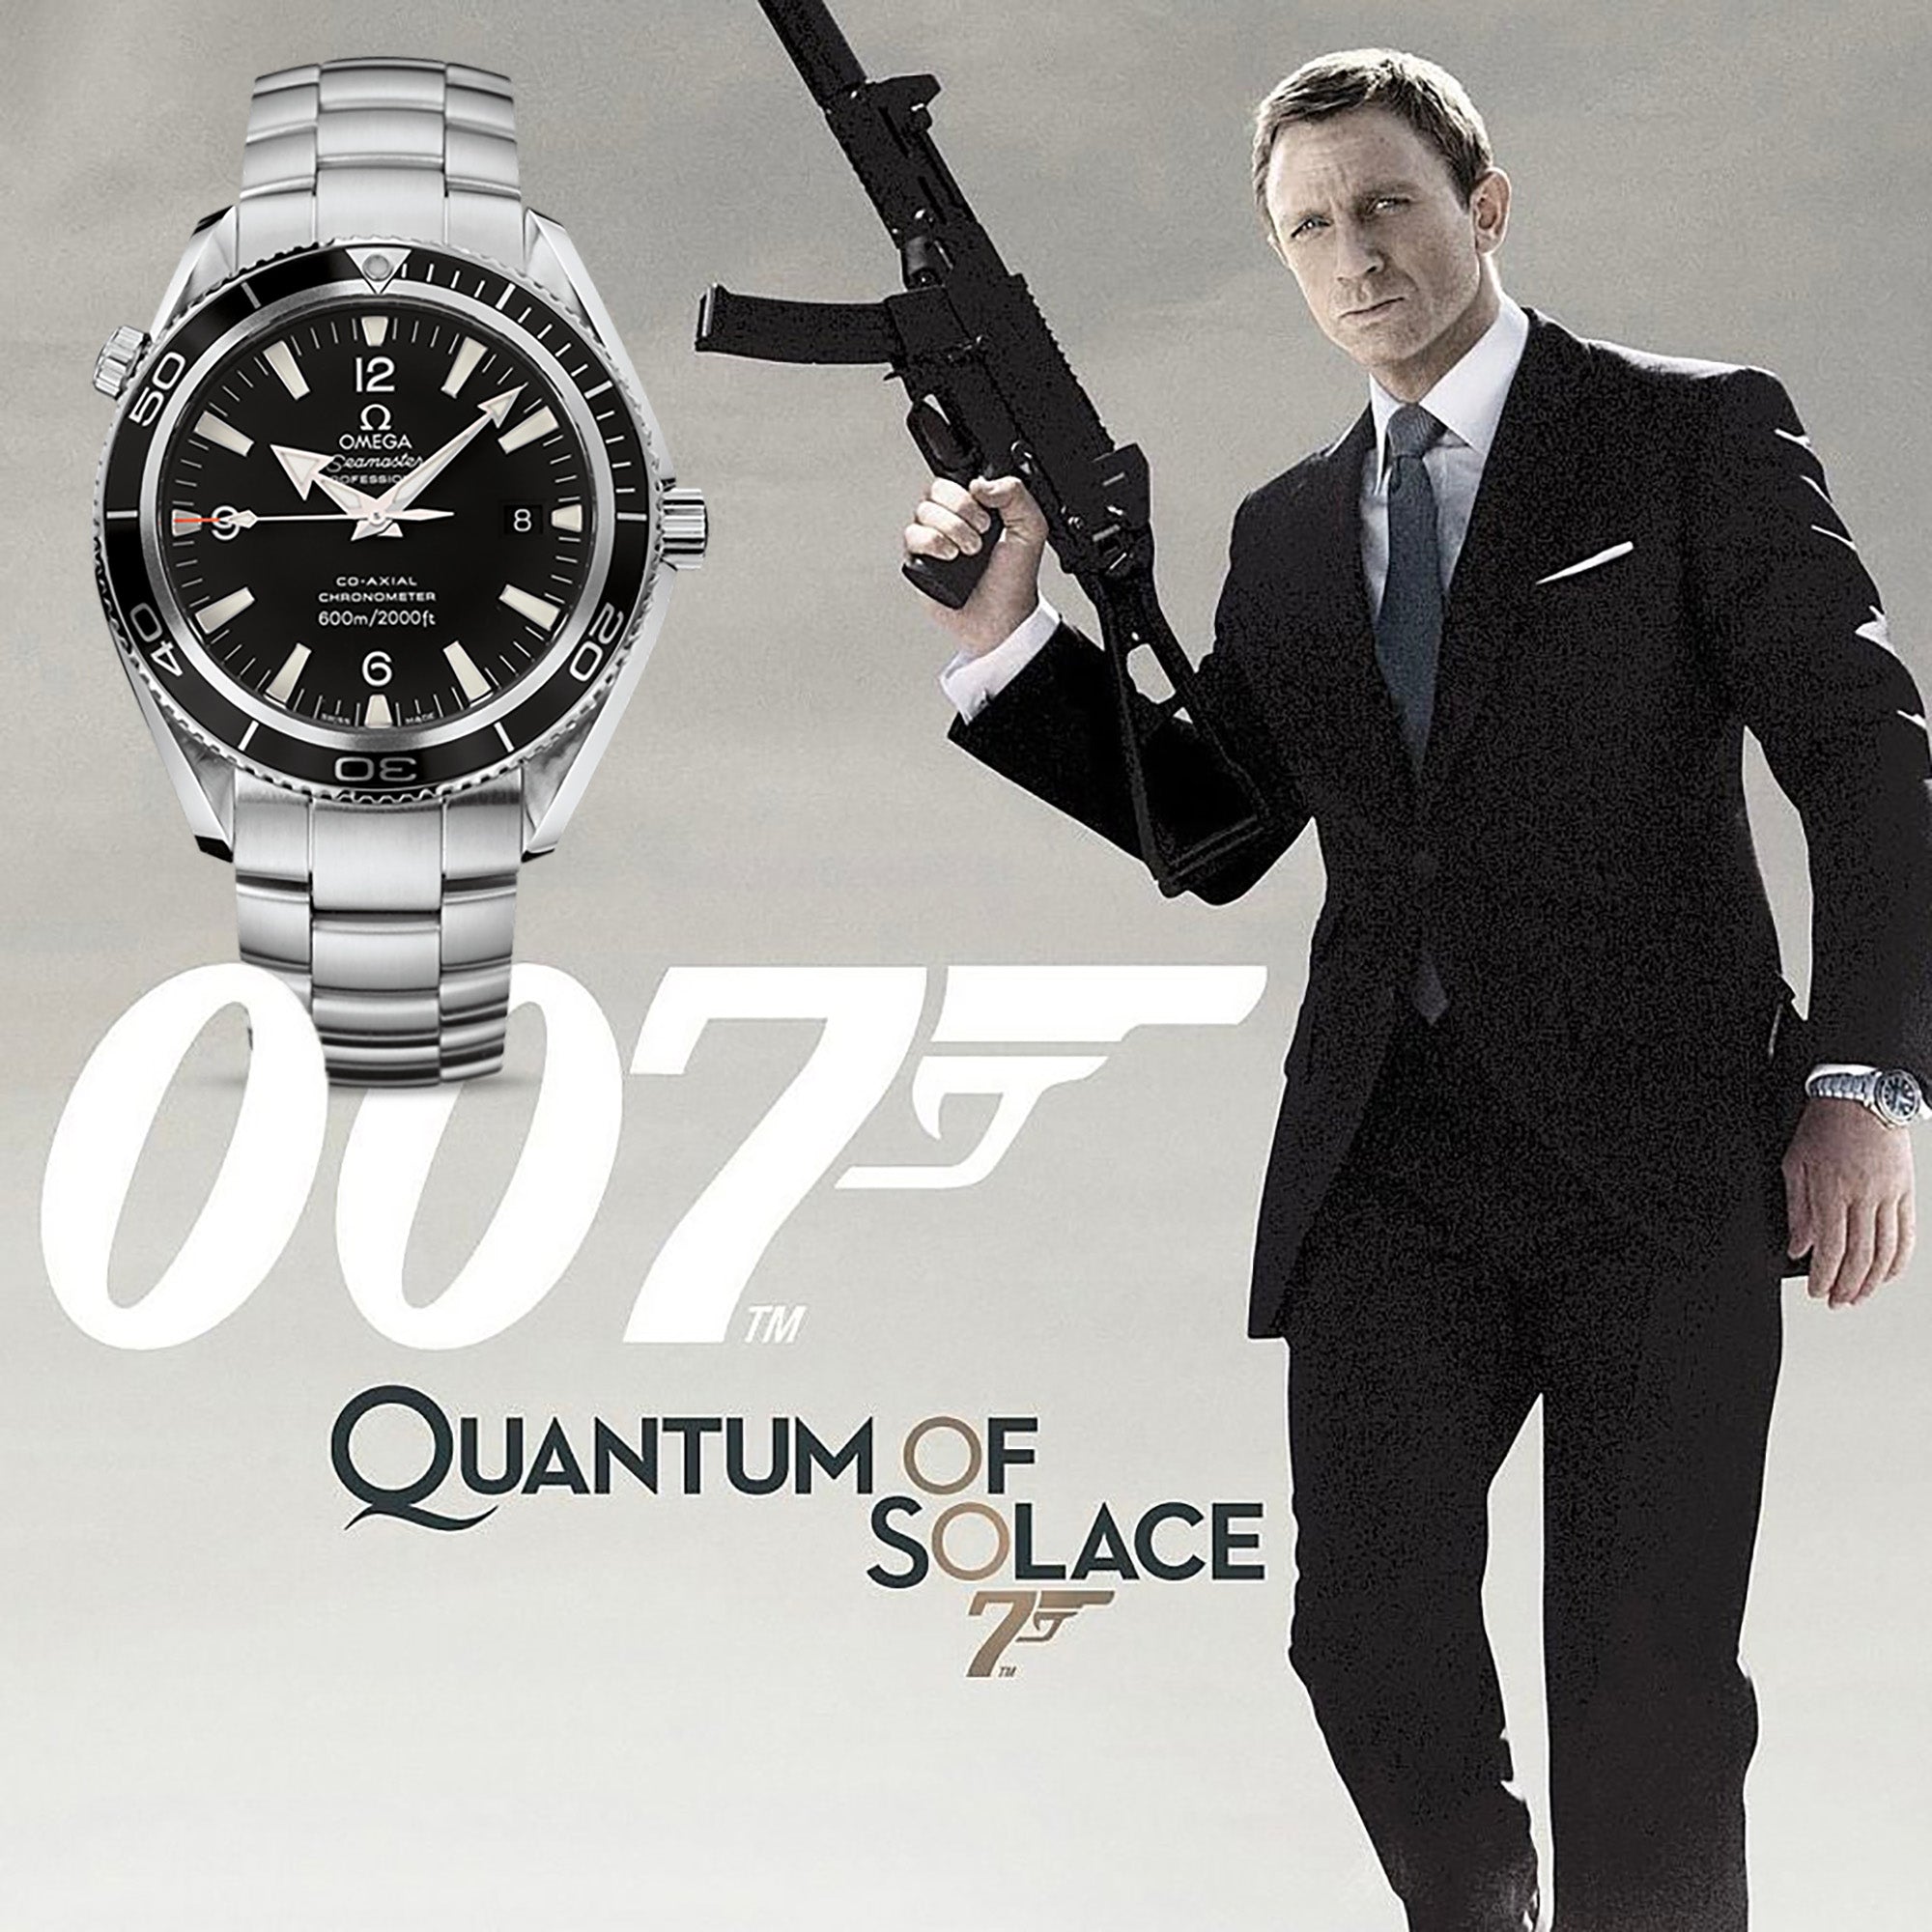 Omega Seamaster Planet Ocean 600M Co-Axial Chronometer Ref. 2201.50.00 in Quantum Of Solace (2008)